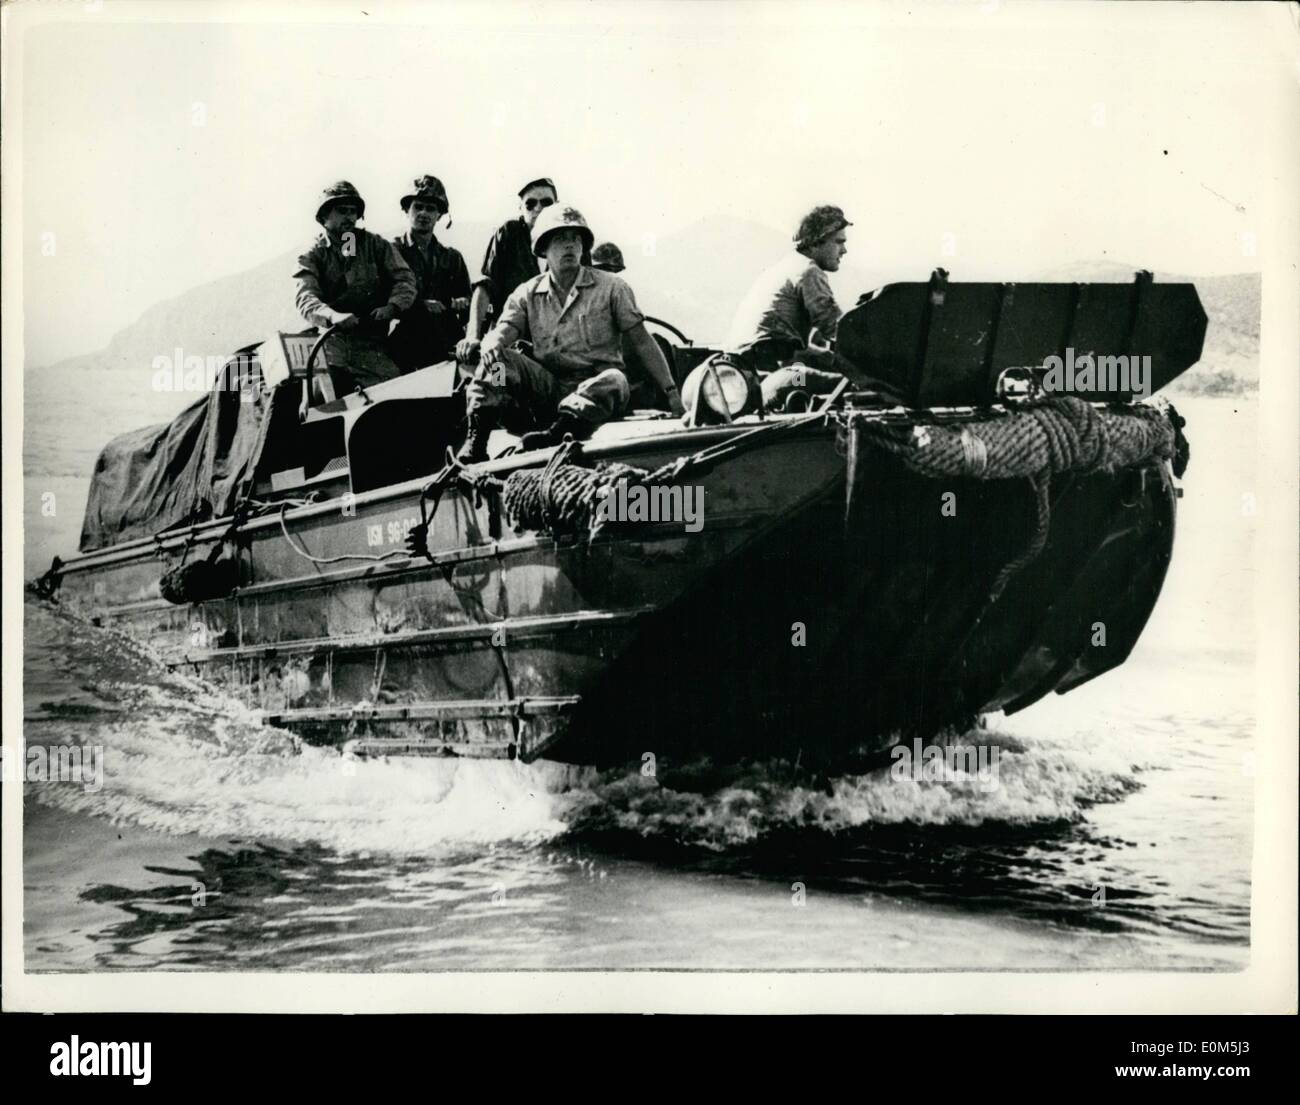 Jul. 07, 1953 - Large Scale N.A.T.O. Amphibious exercises ''Black Wave'' in Northern Greece: The large scale N.A.T.O. amphibious combined exercises ''Black Wave'' has just been completed in Northern Greece, under the personal supervision of General Wyman, commander of Ismyrne Allied H.Q. as well as Chiefs of Greece, Turkey and Italy National Defence General Staffs. Greek, United States, Turkish and Italian Air Force United took part as well as one Greek Infantry Division, a Greek Raiding Force Batallion, a U.S. Marine Bn. and the U.S. 6th Fleet Stock Photo